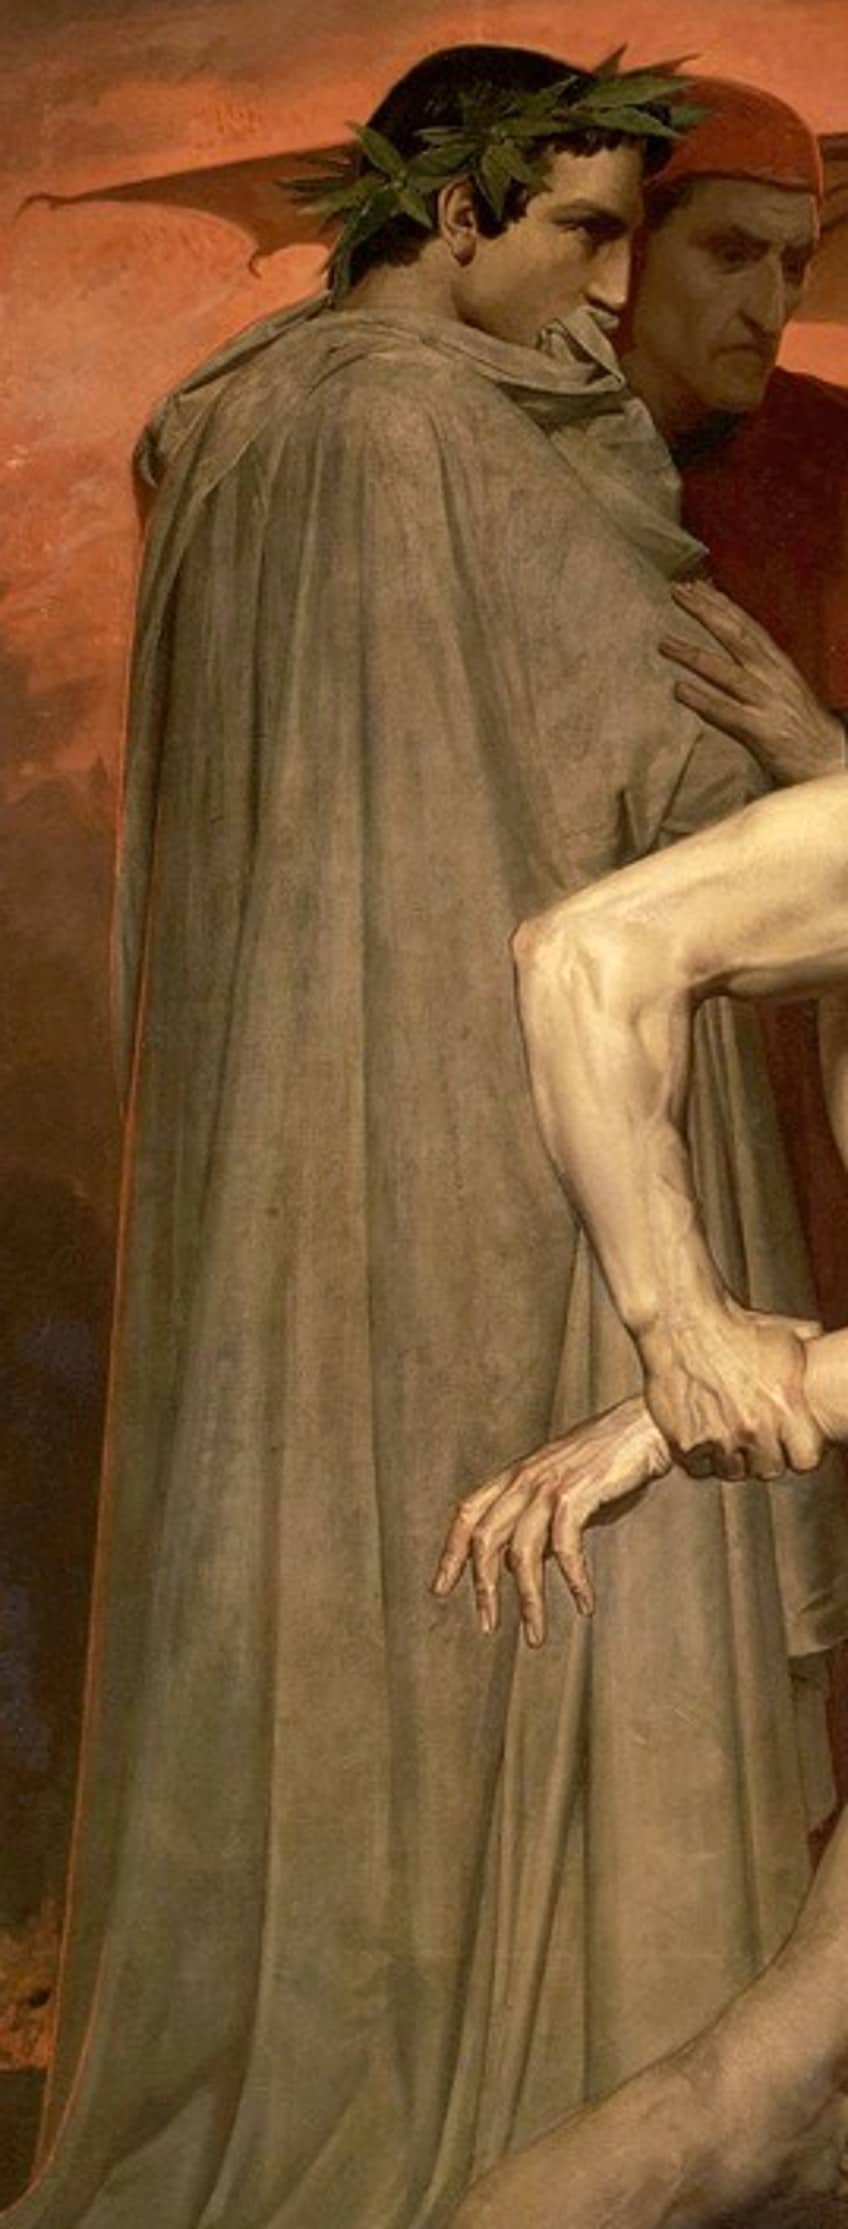 Texture in the Dante and-Virgil Painting